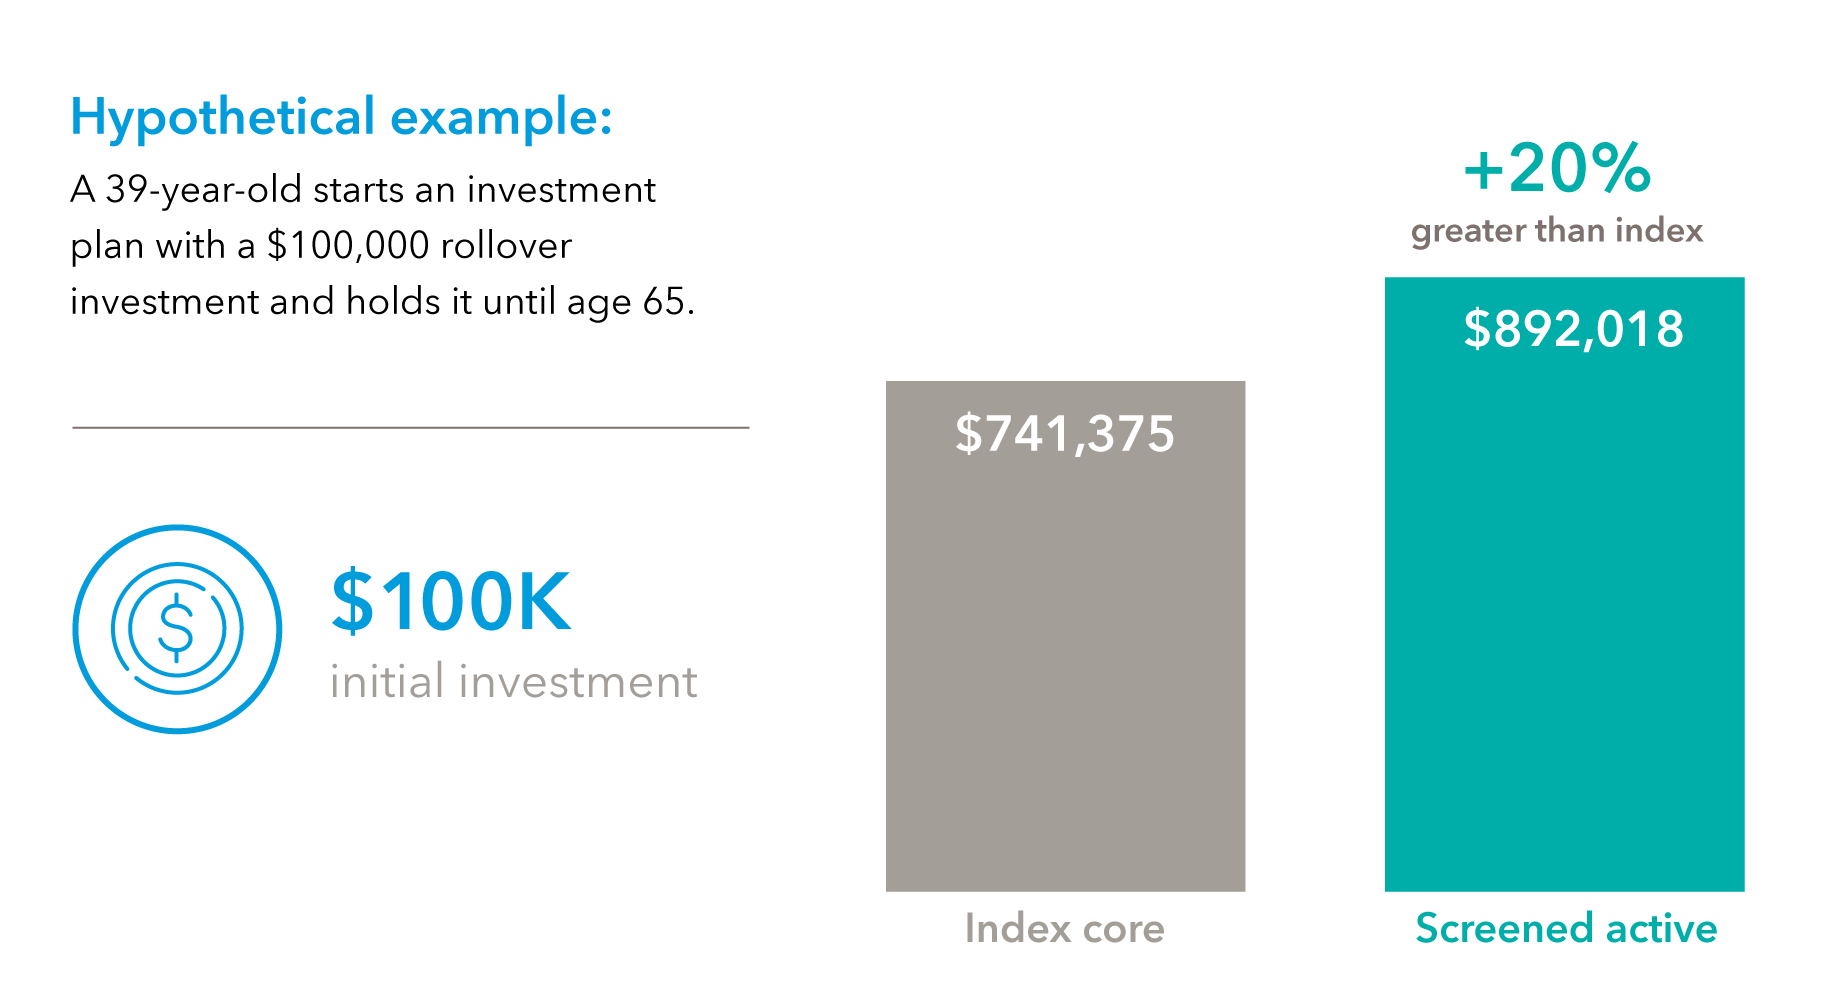 The chart shows the hypothetical example of a 39-year-old who starts an investment plan with a $100,000 rollover investment and holds it until age 65. After 26 years, an investment in the Index core would amount to $741,375 while the investment in Screened active funds would amount to $892,018, which is 20% greater than the index.